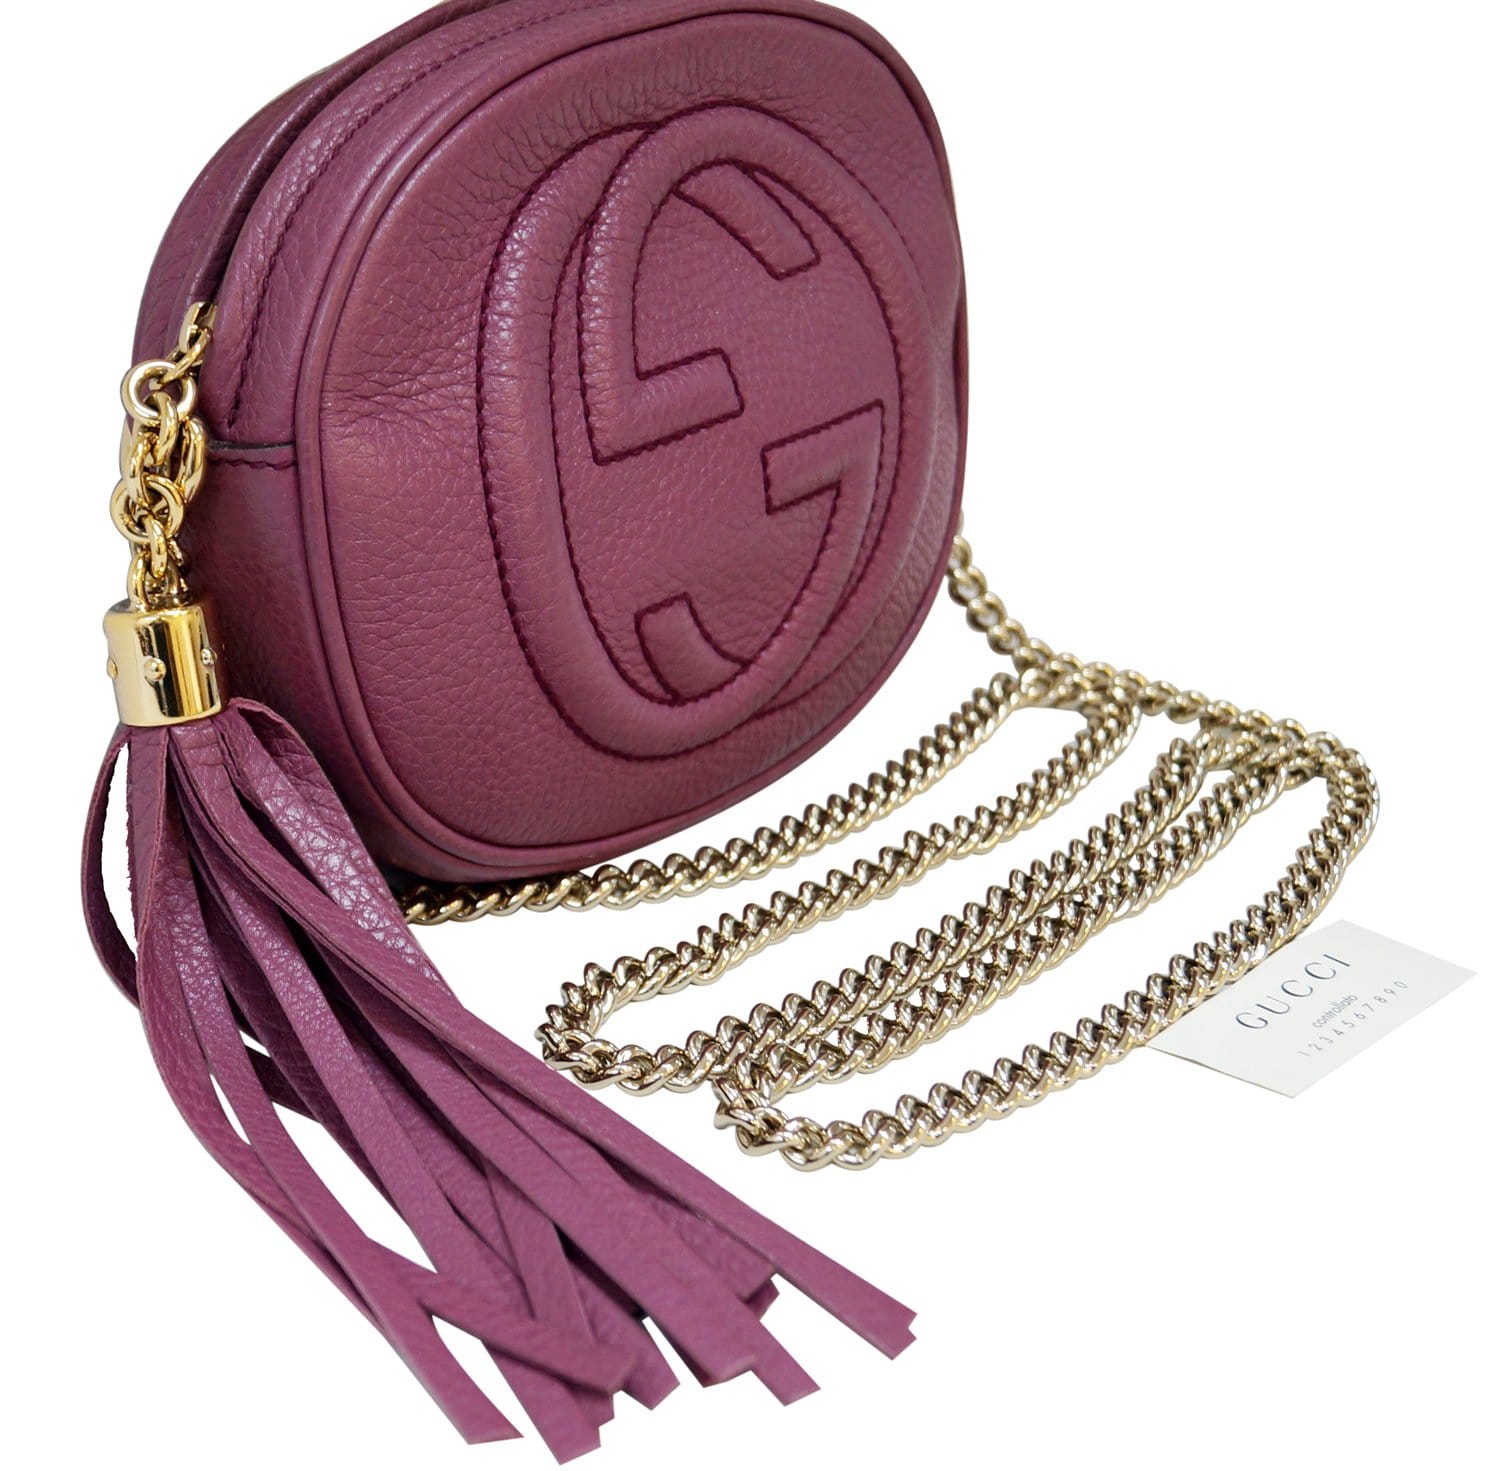 Gucci Soho Leather Cross-Body Bag in Pink